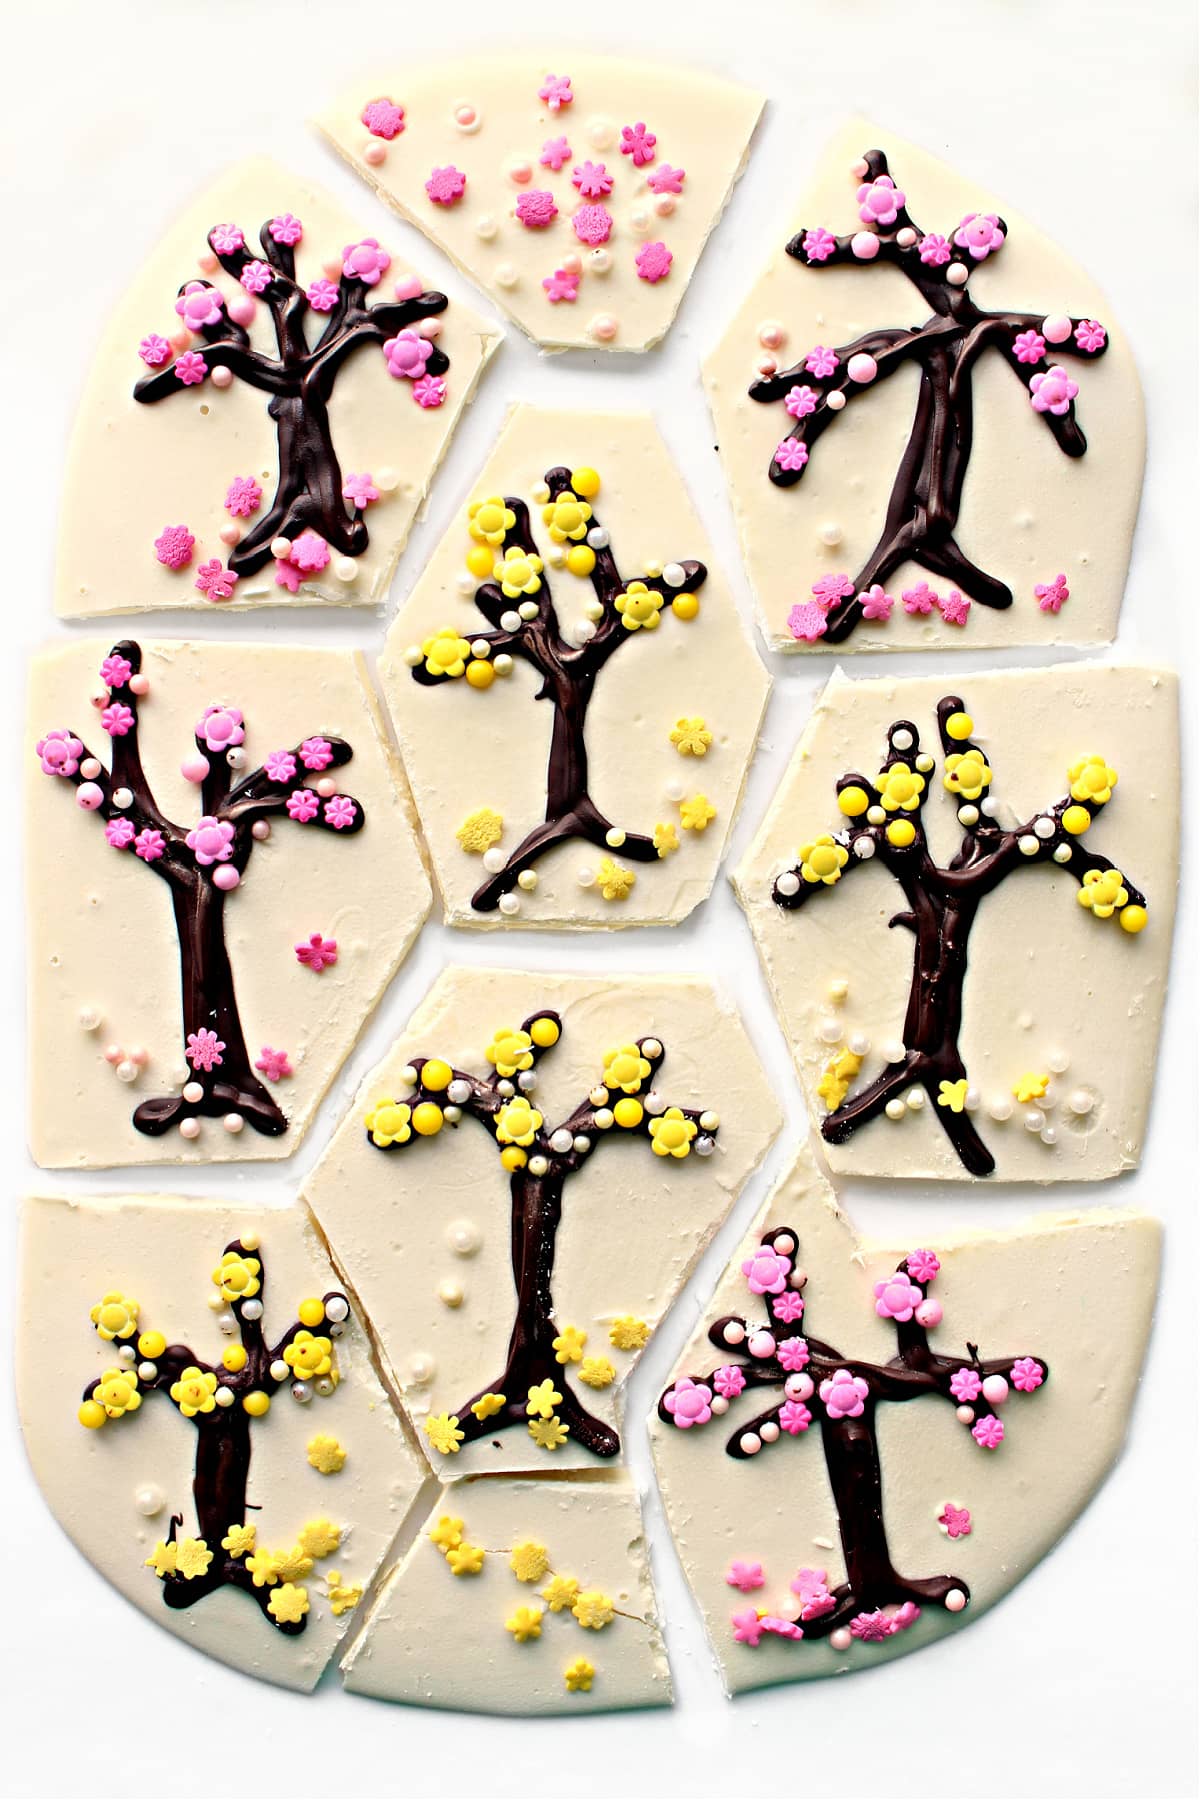 Chocolate Bark cut into pieces so that each serving includes one decorated tree design.